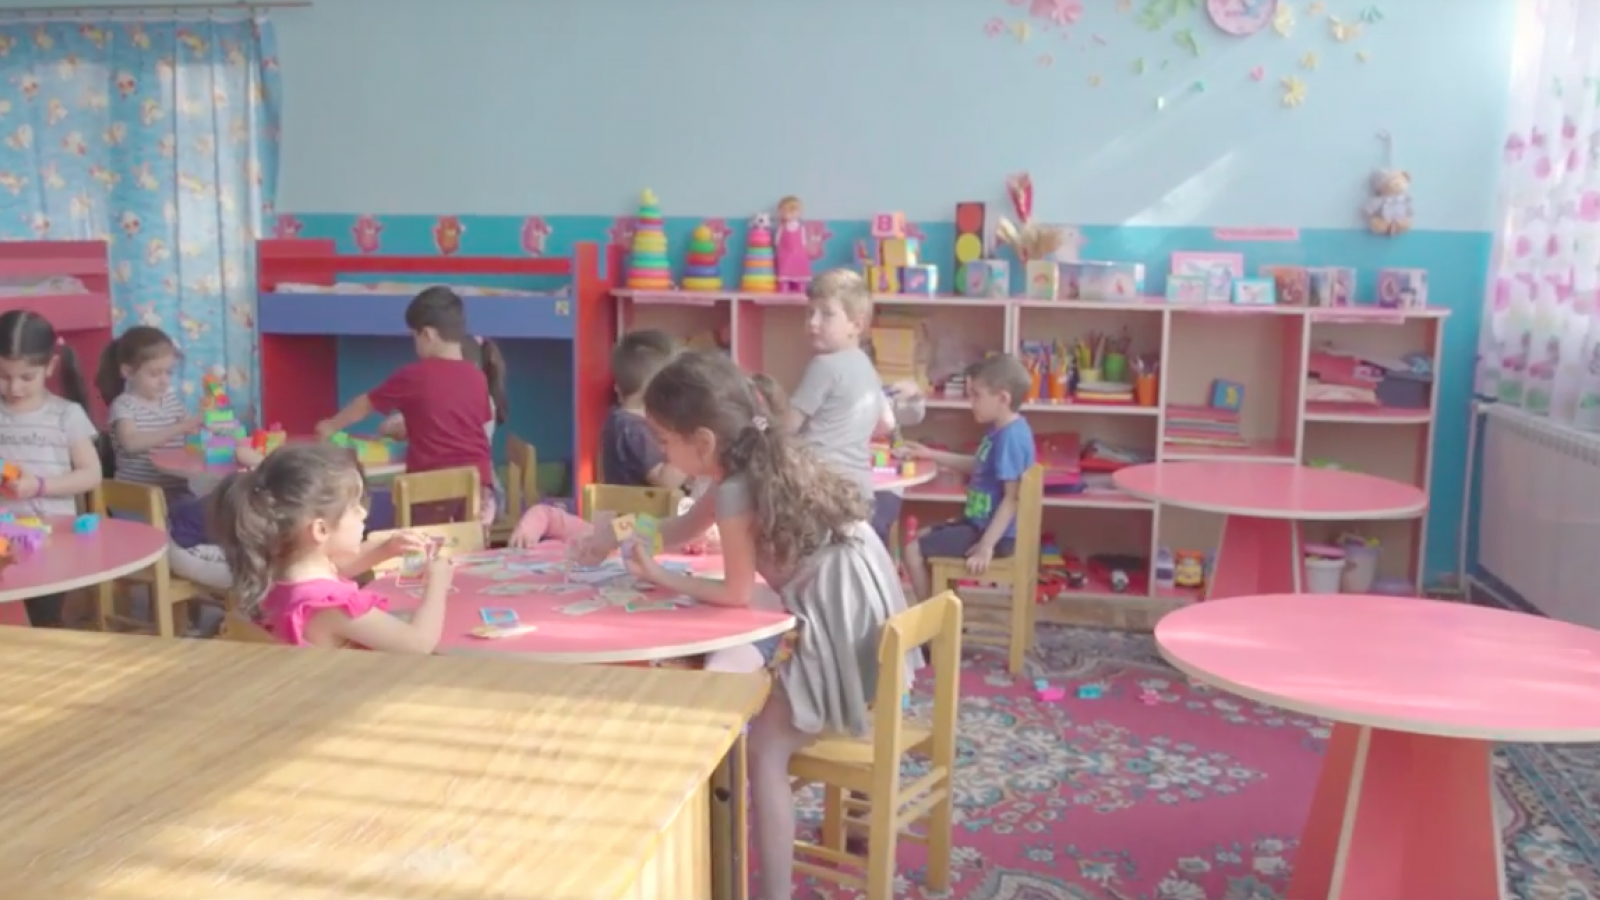 Armenia will make kindergartens energy efficient and resilient to earthquakes thanks to EU support